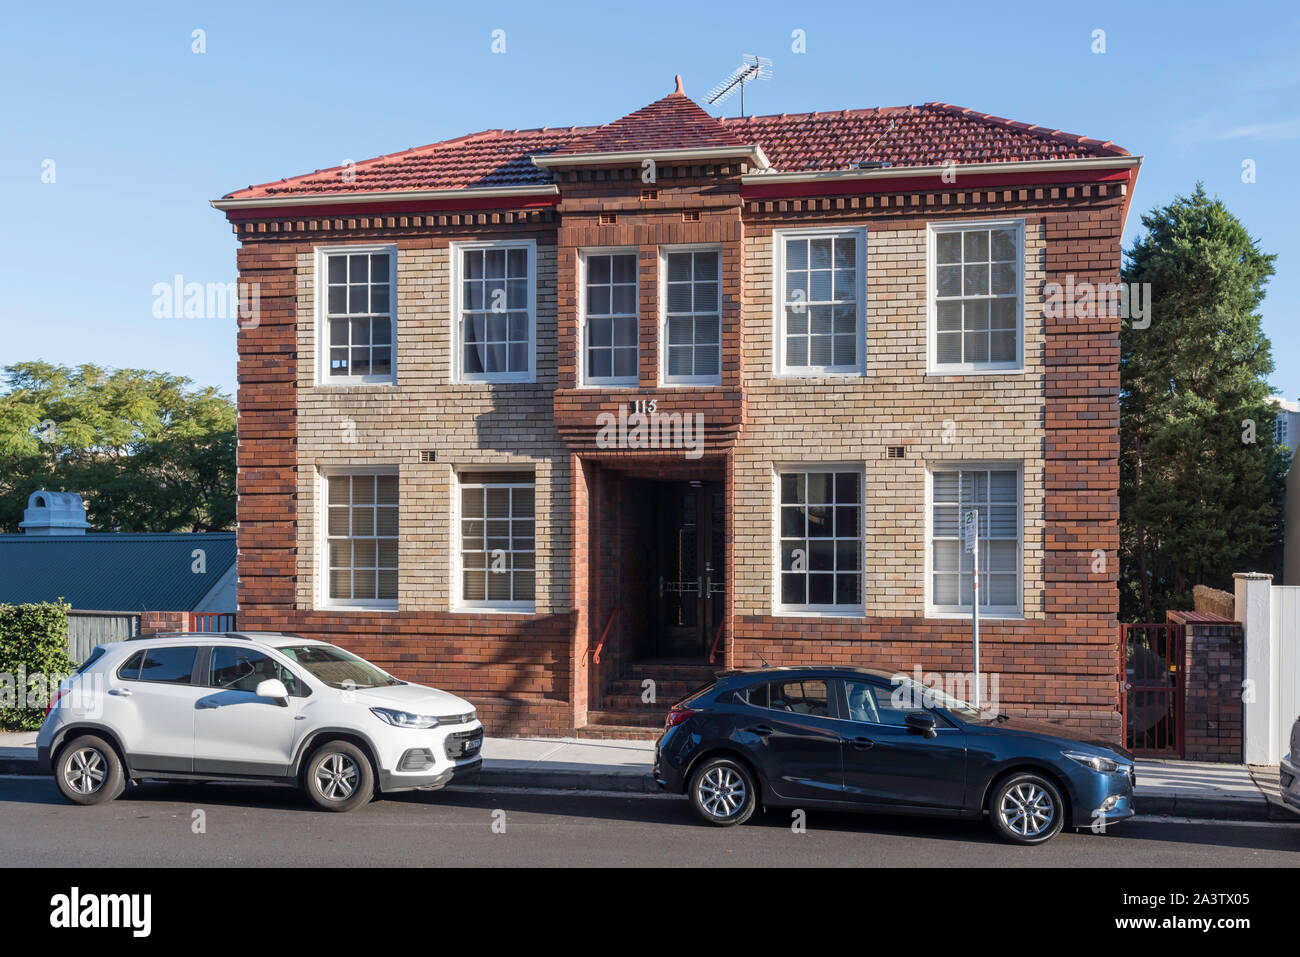 A Georgian Revival style apartment block of unknown build date, possibly 1930's-1940's in the Sydney suburb of Kirribilli, in Australia Stock Photo